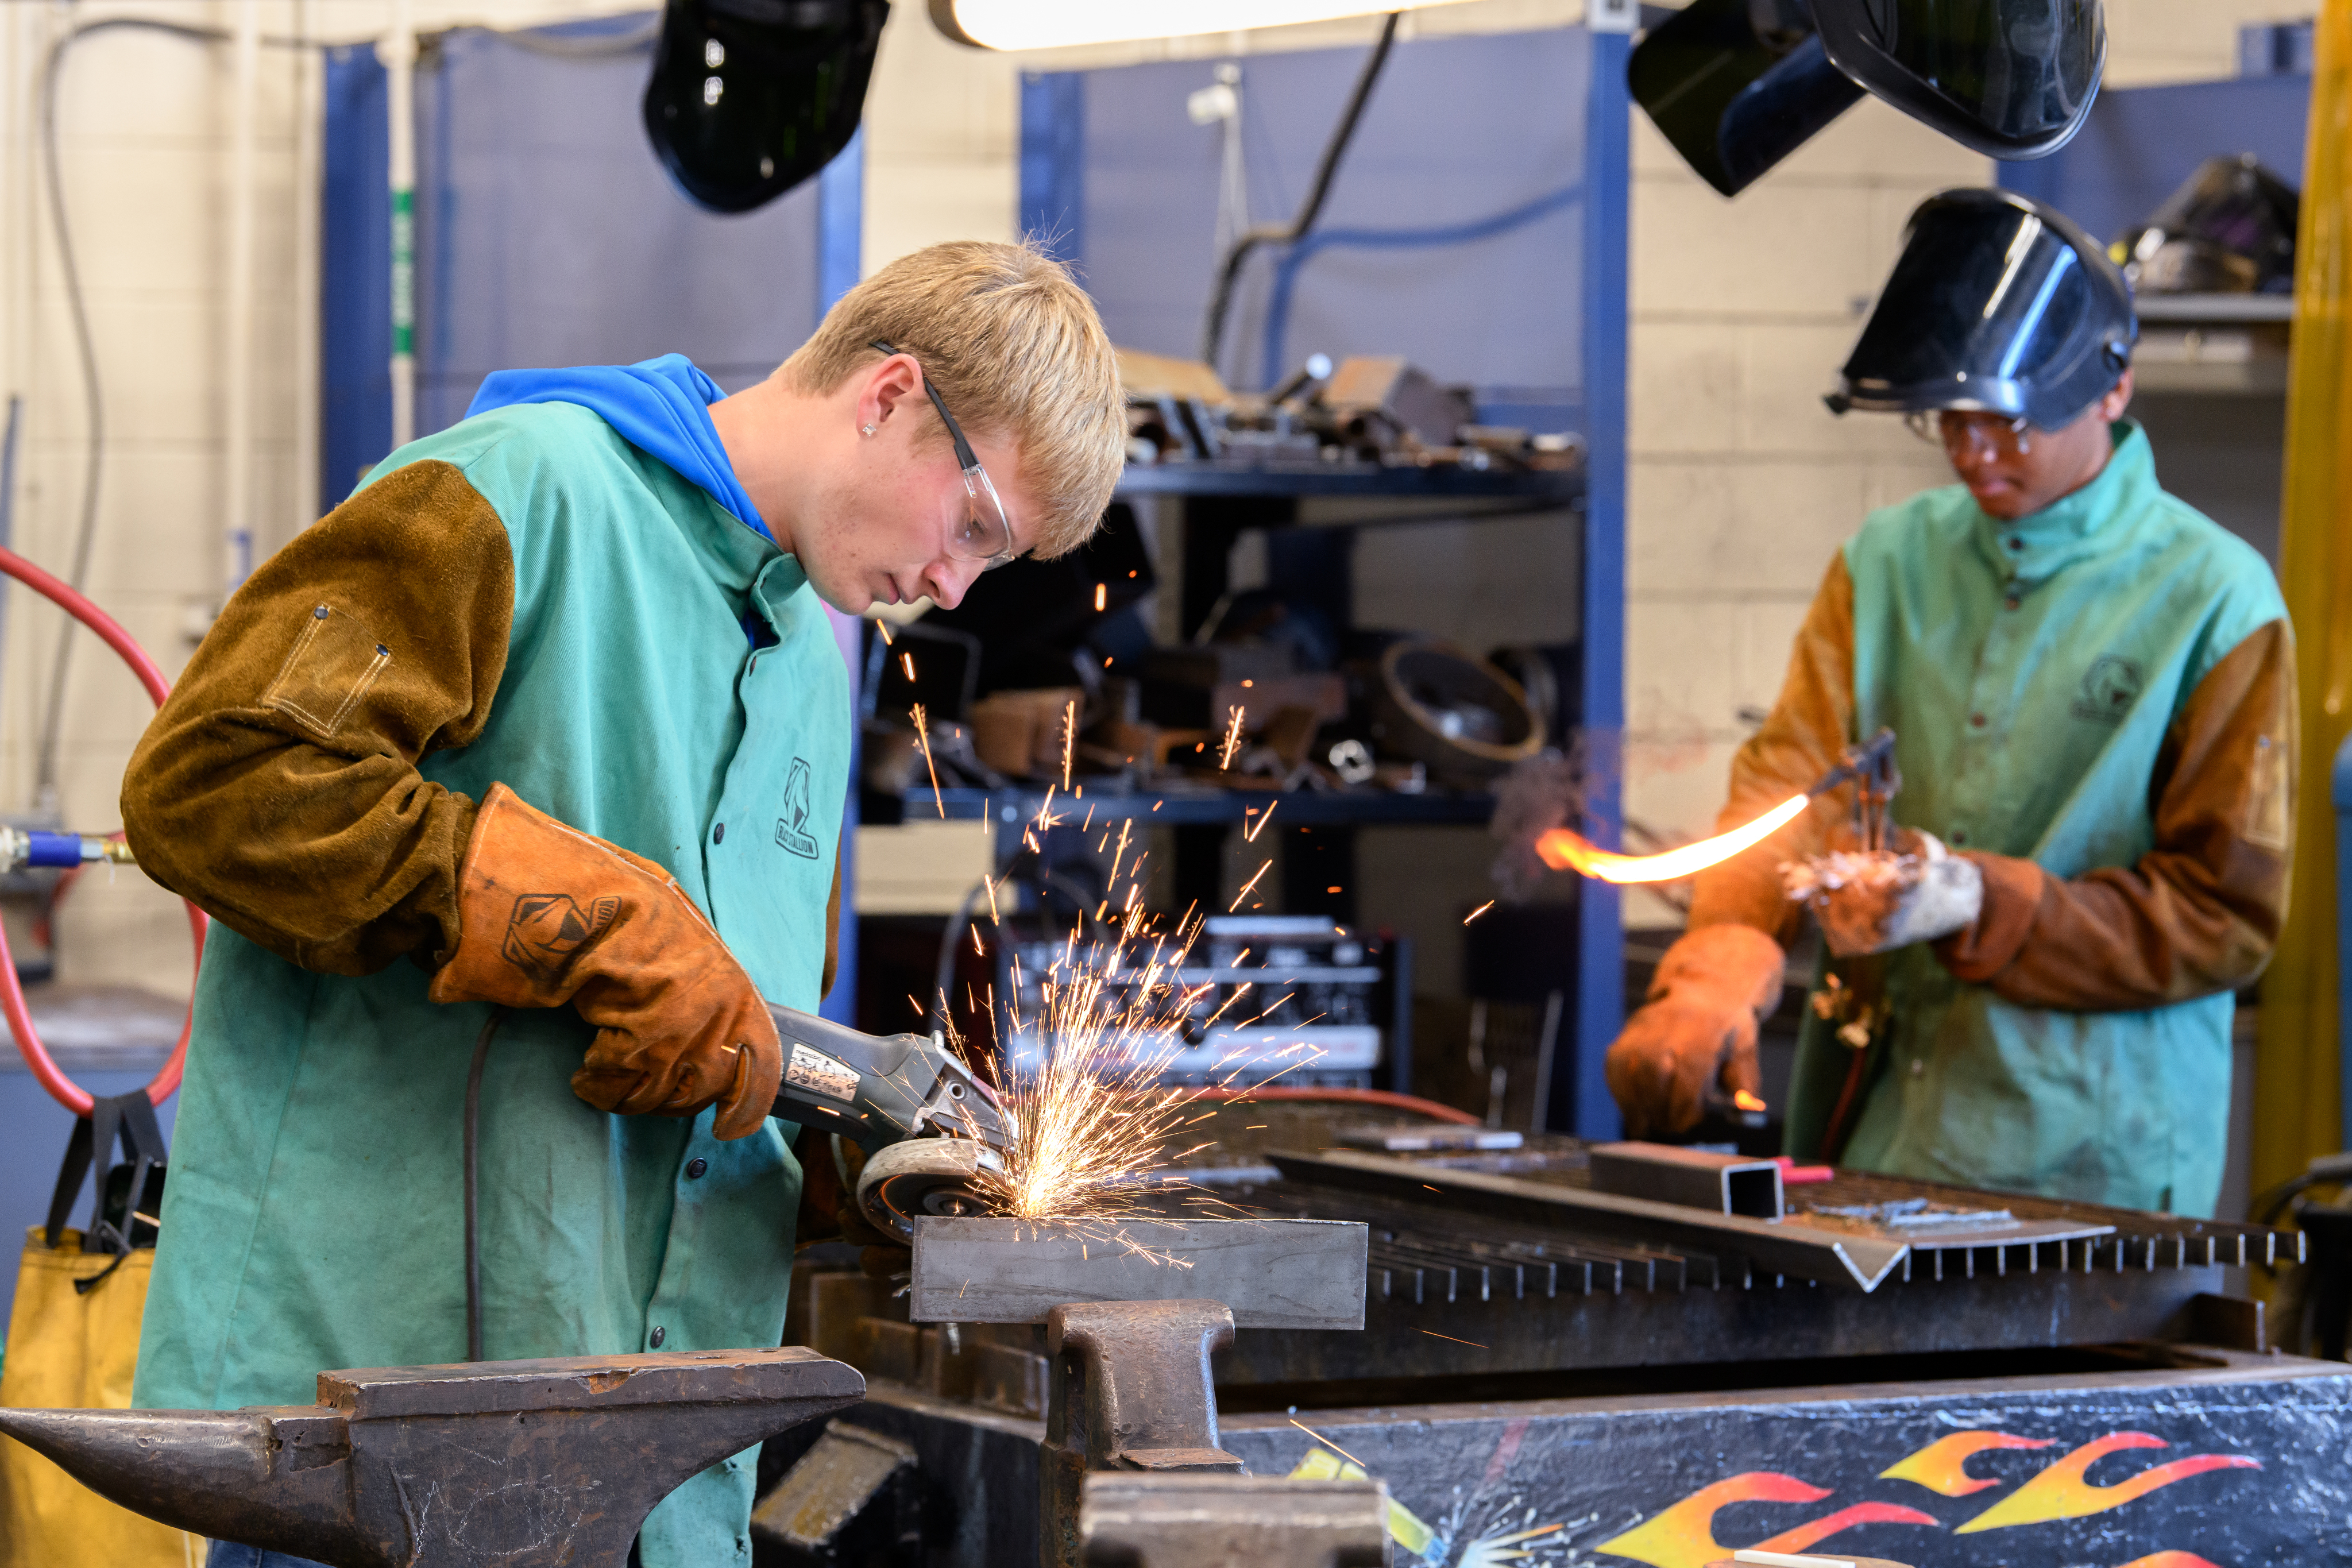 Two welding students working in the lab together.